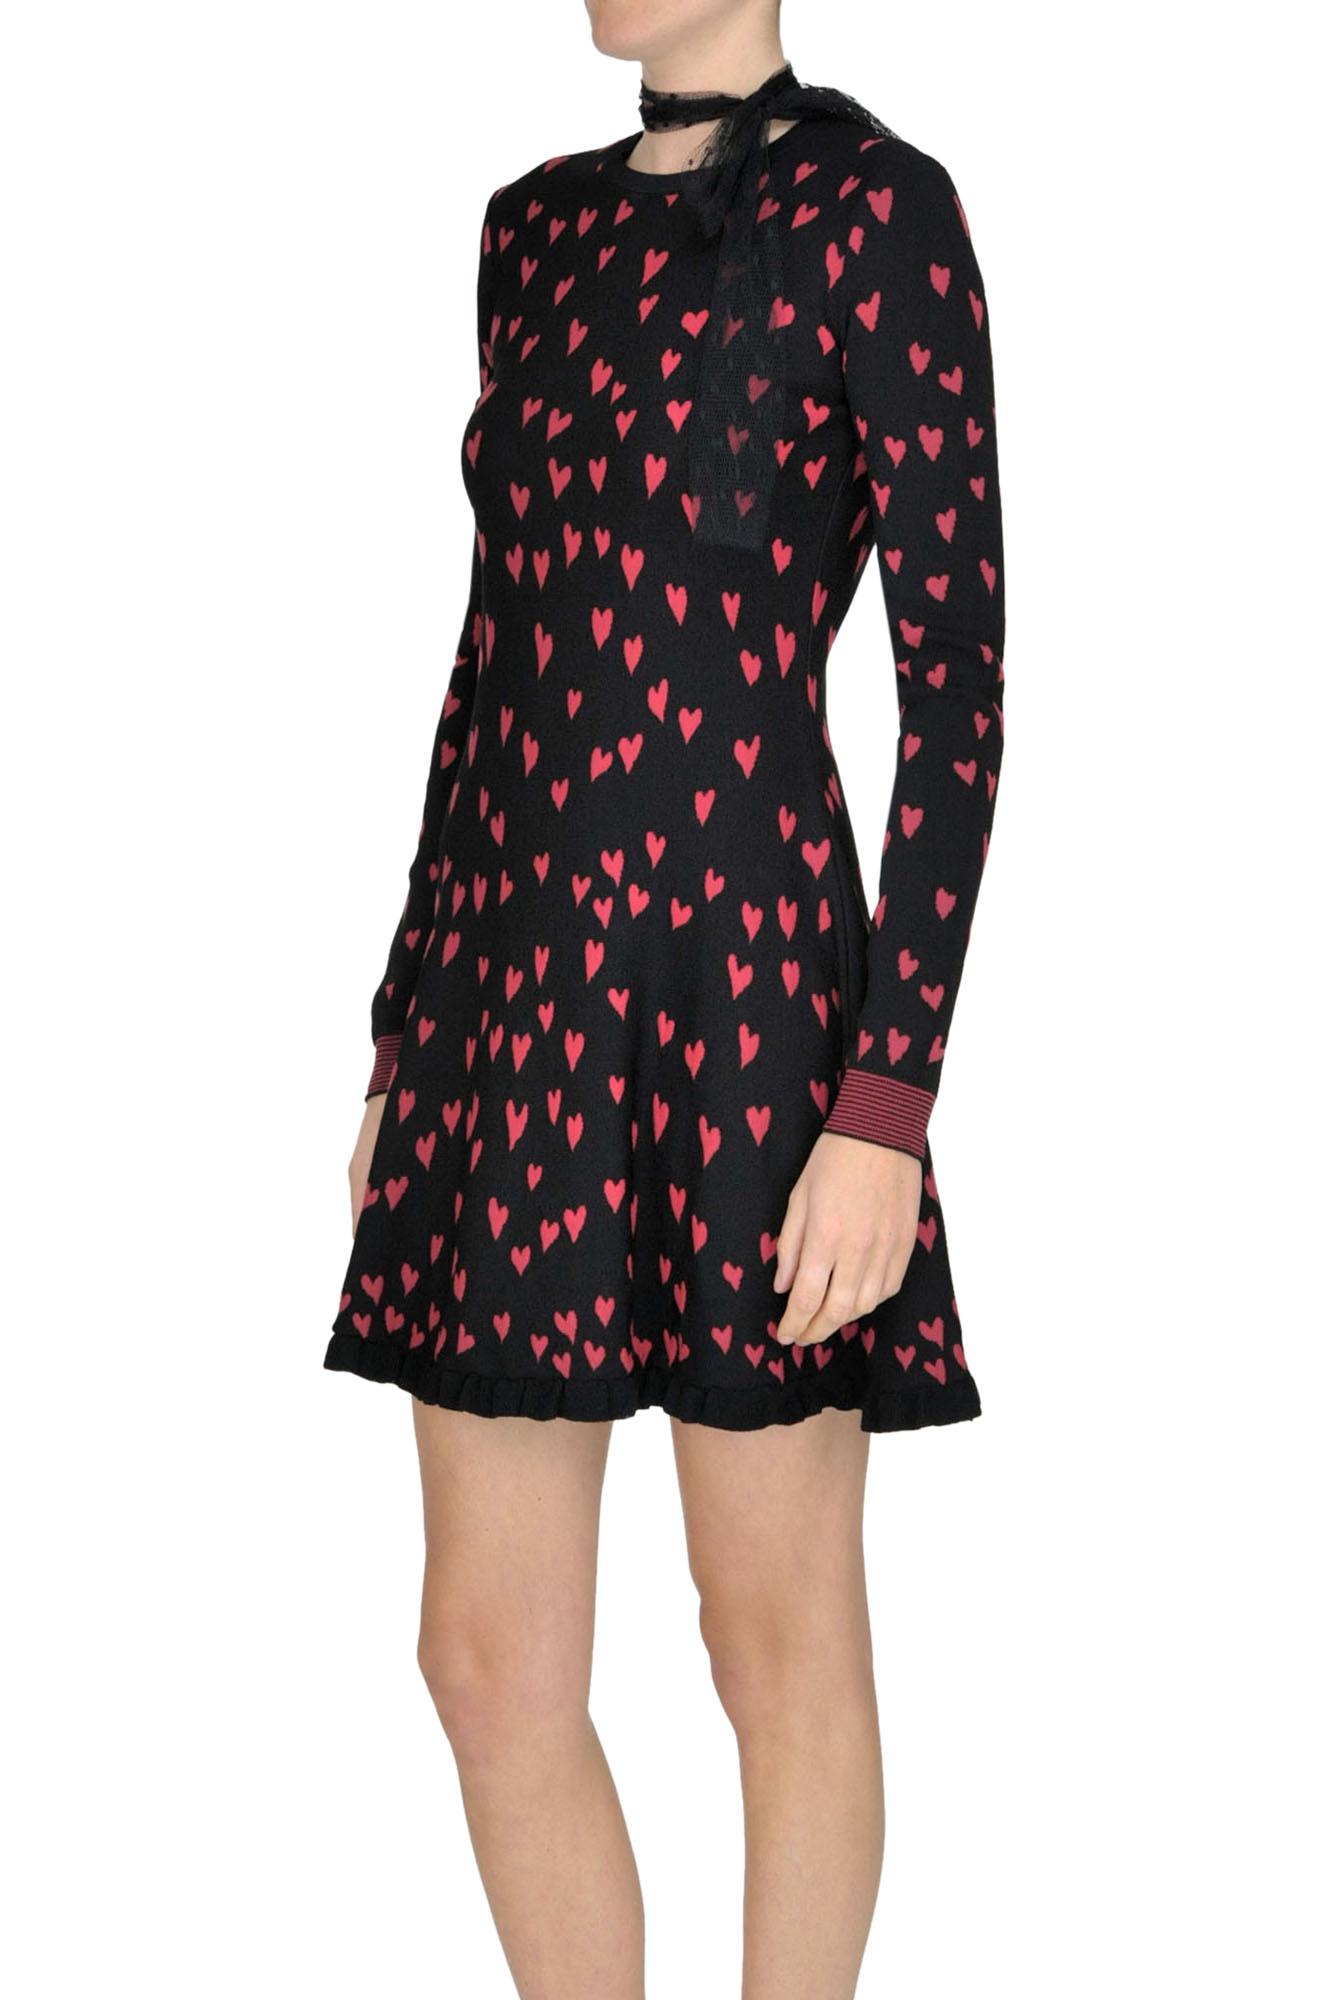 RED Valentino Tulle Hearts Print Dress in Black - Lyst